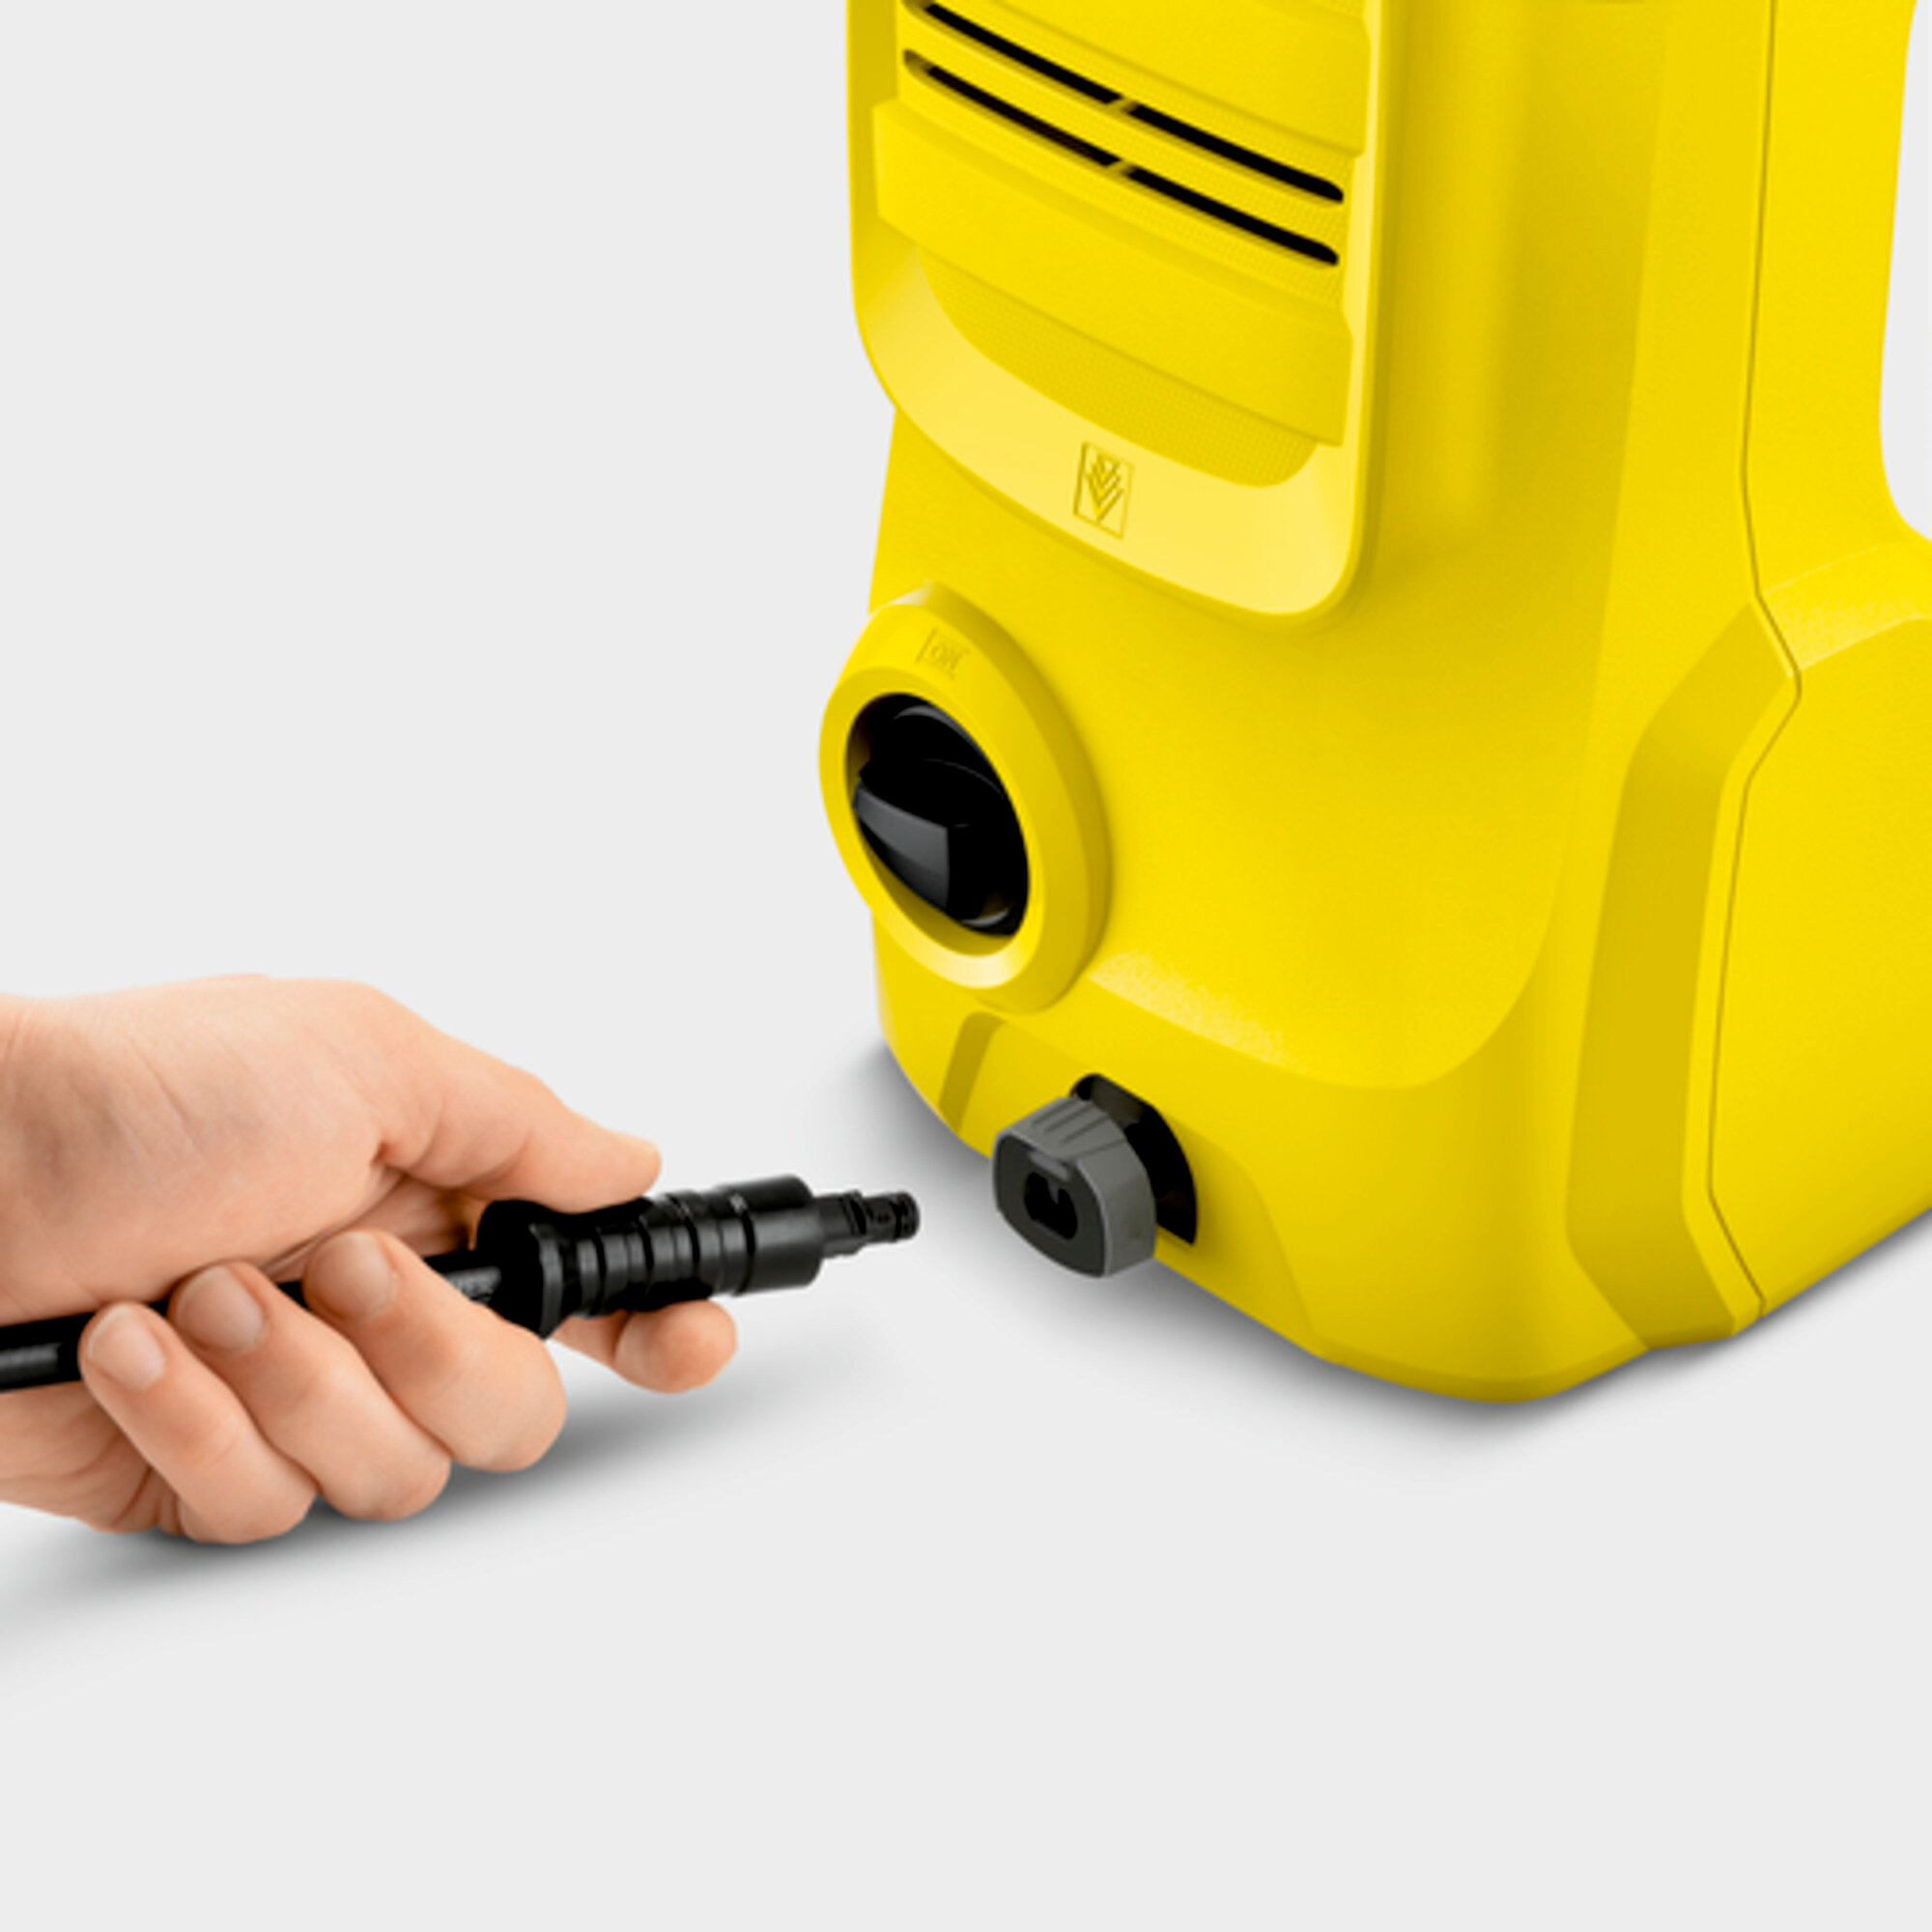 Easy Connect Karcher K2 Compact Home